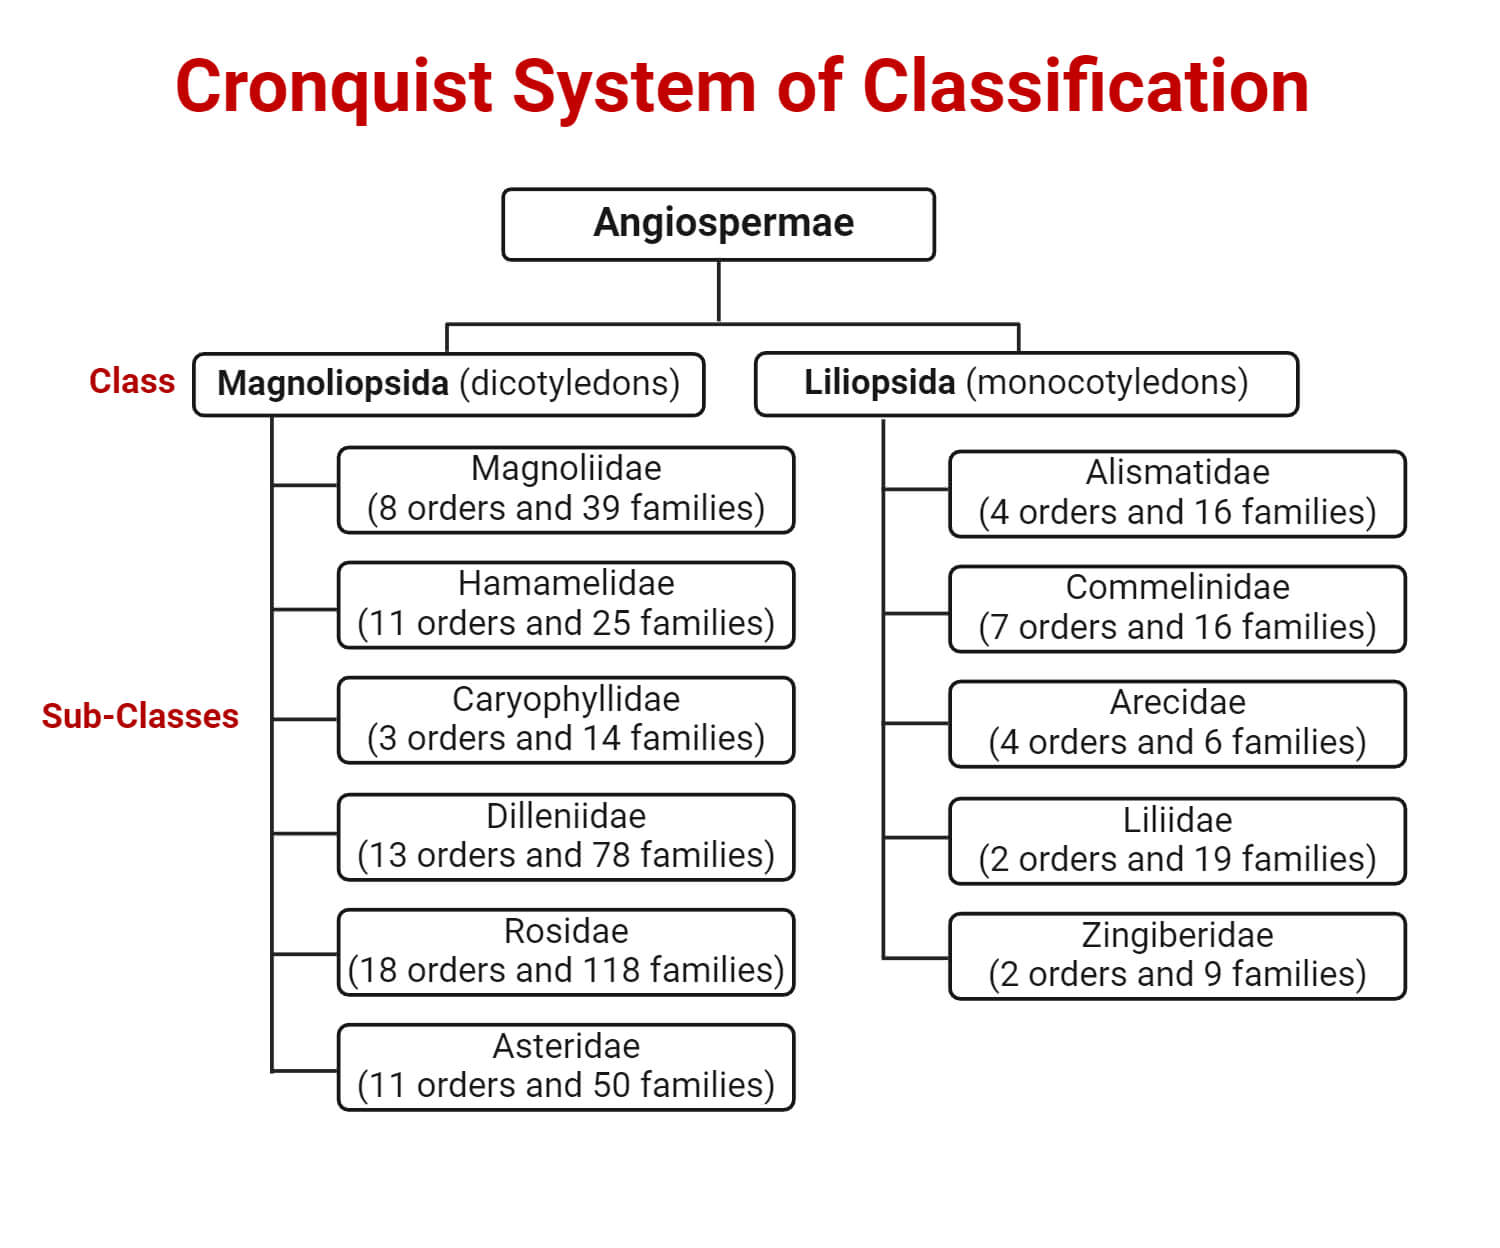 Cronquist System of Classification